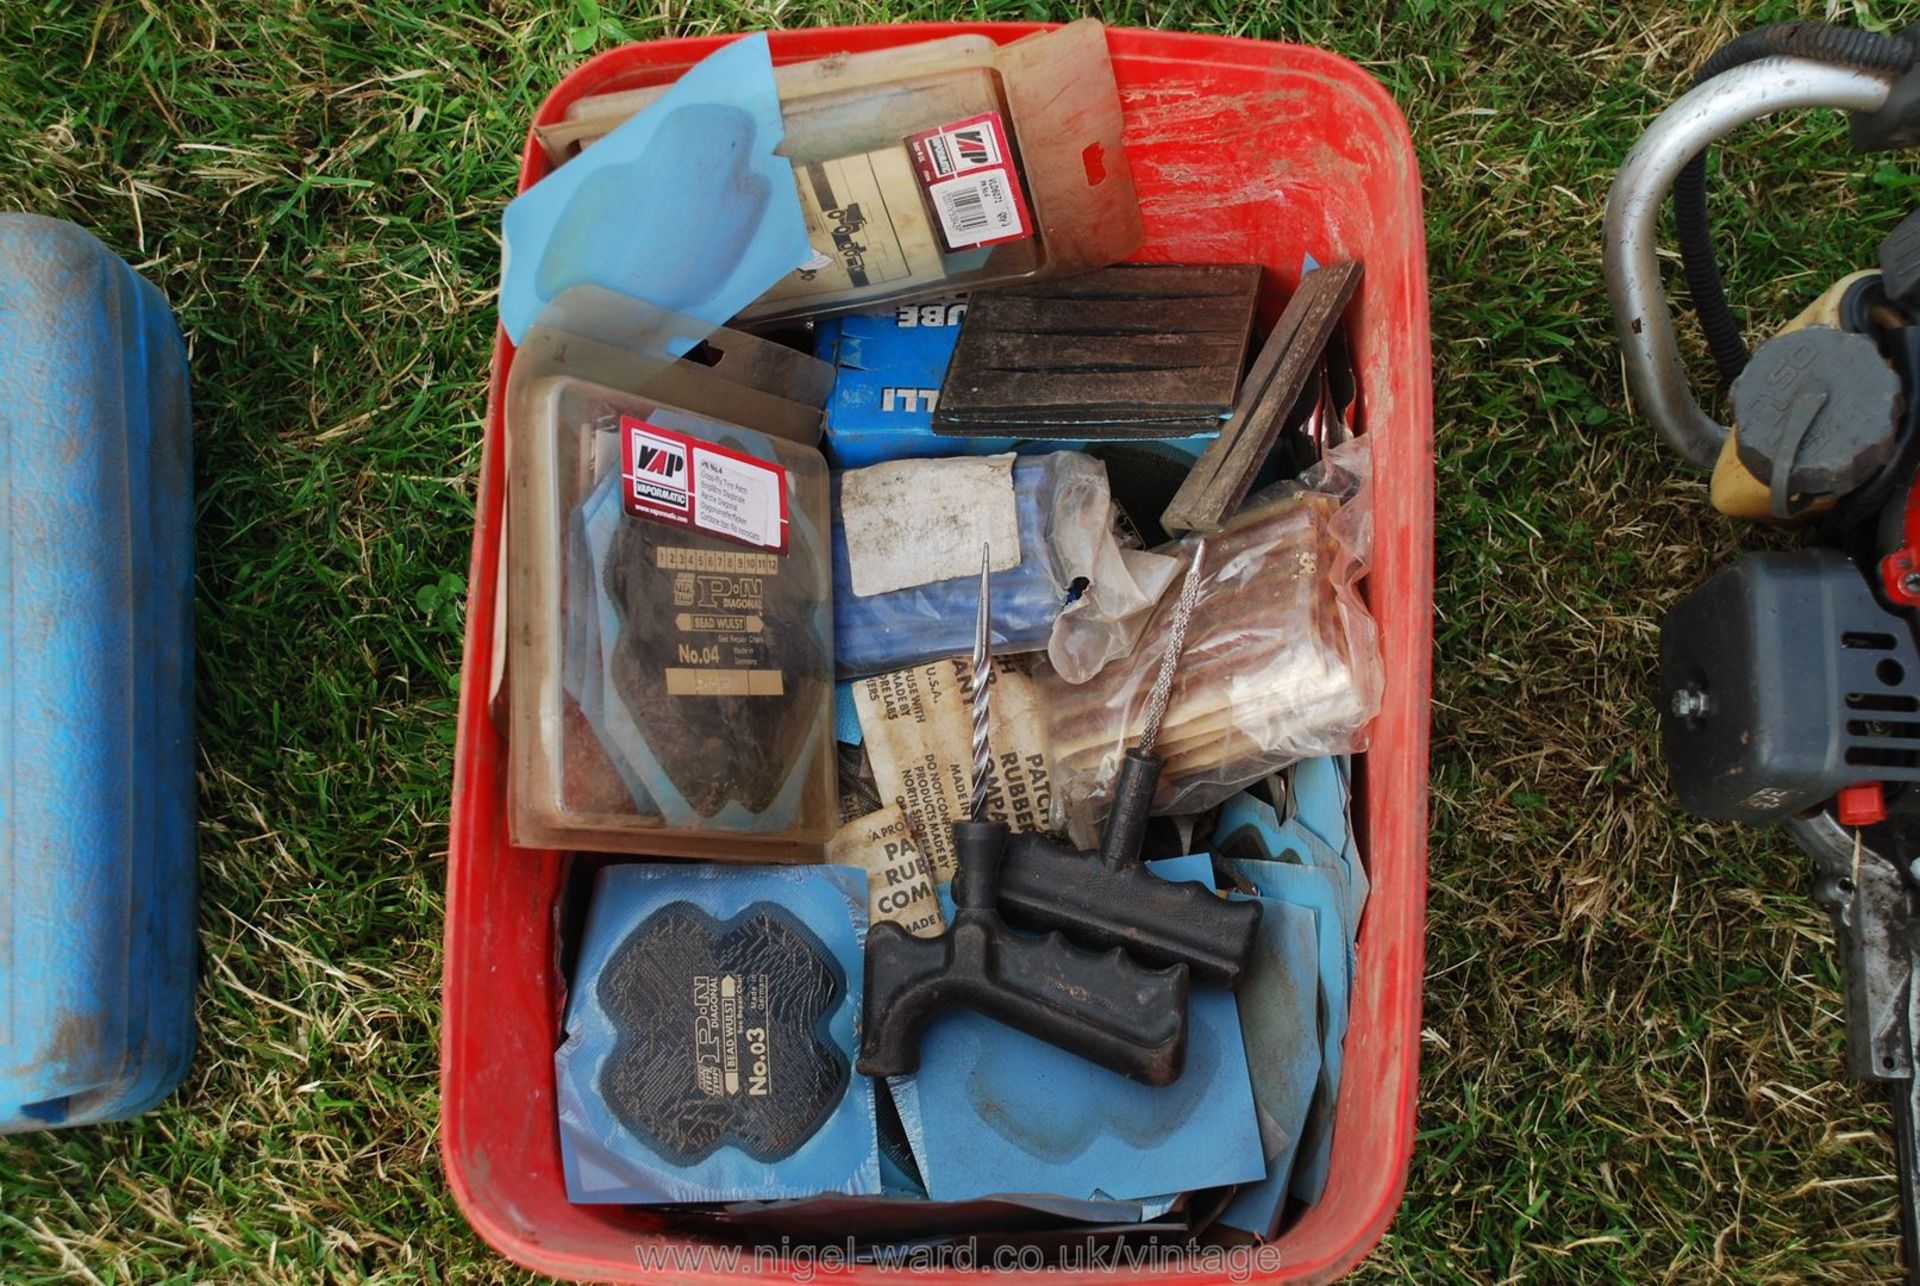 A box of various tyre repair patches and gaiters.